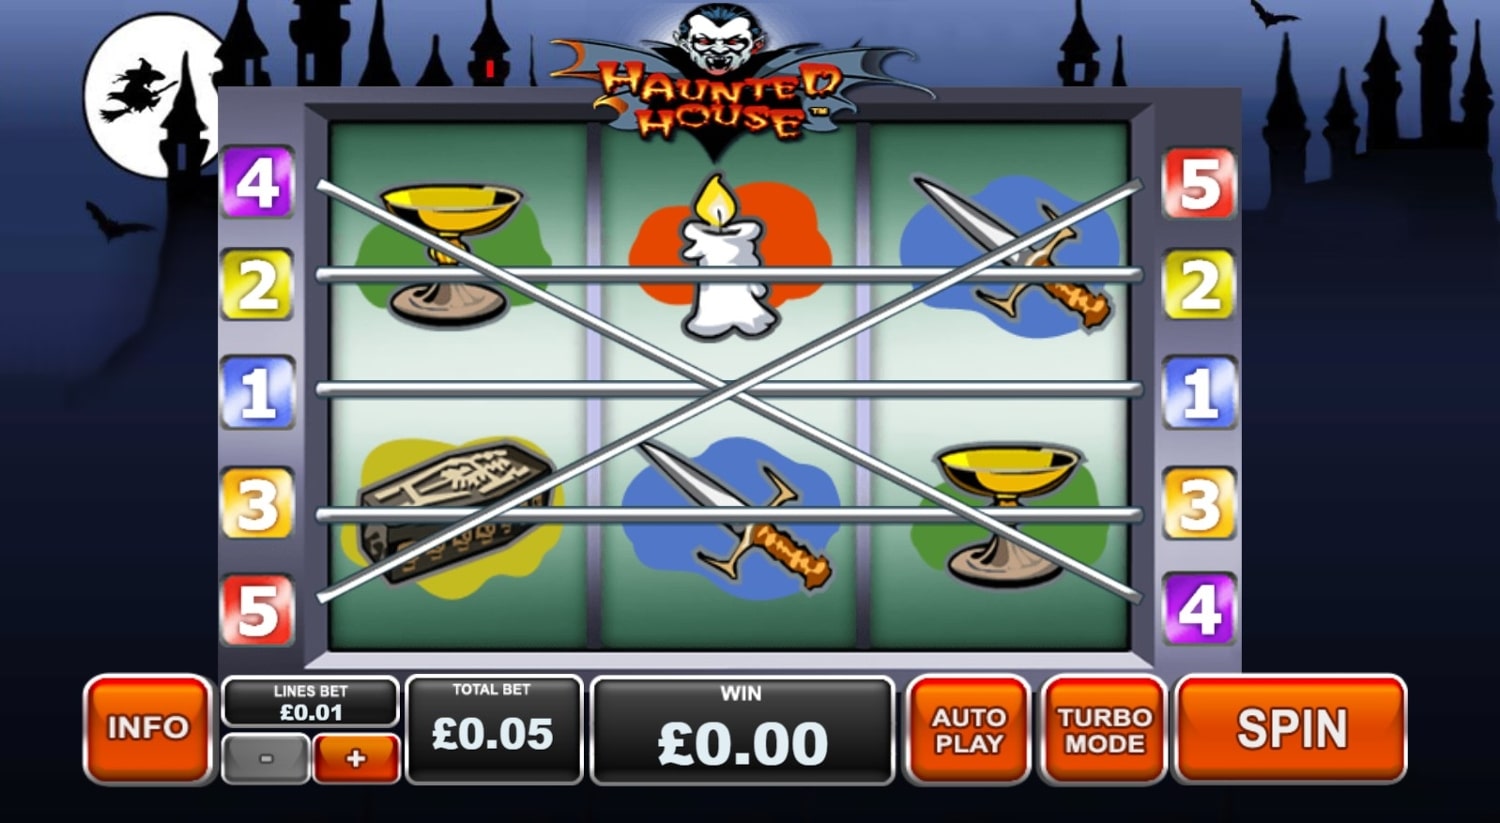 Haunted House Free Spins